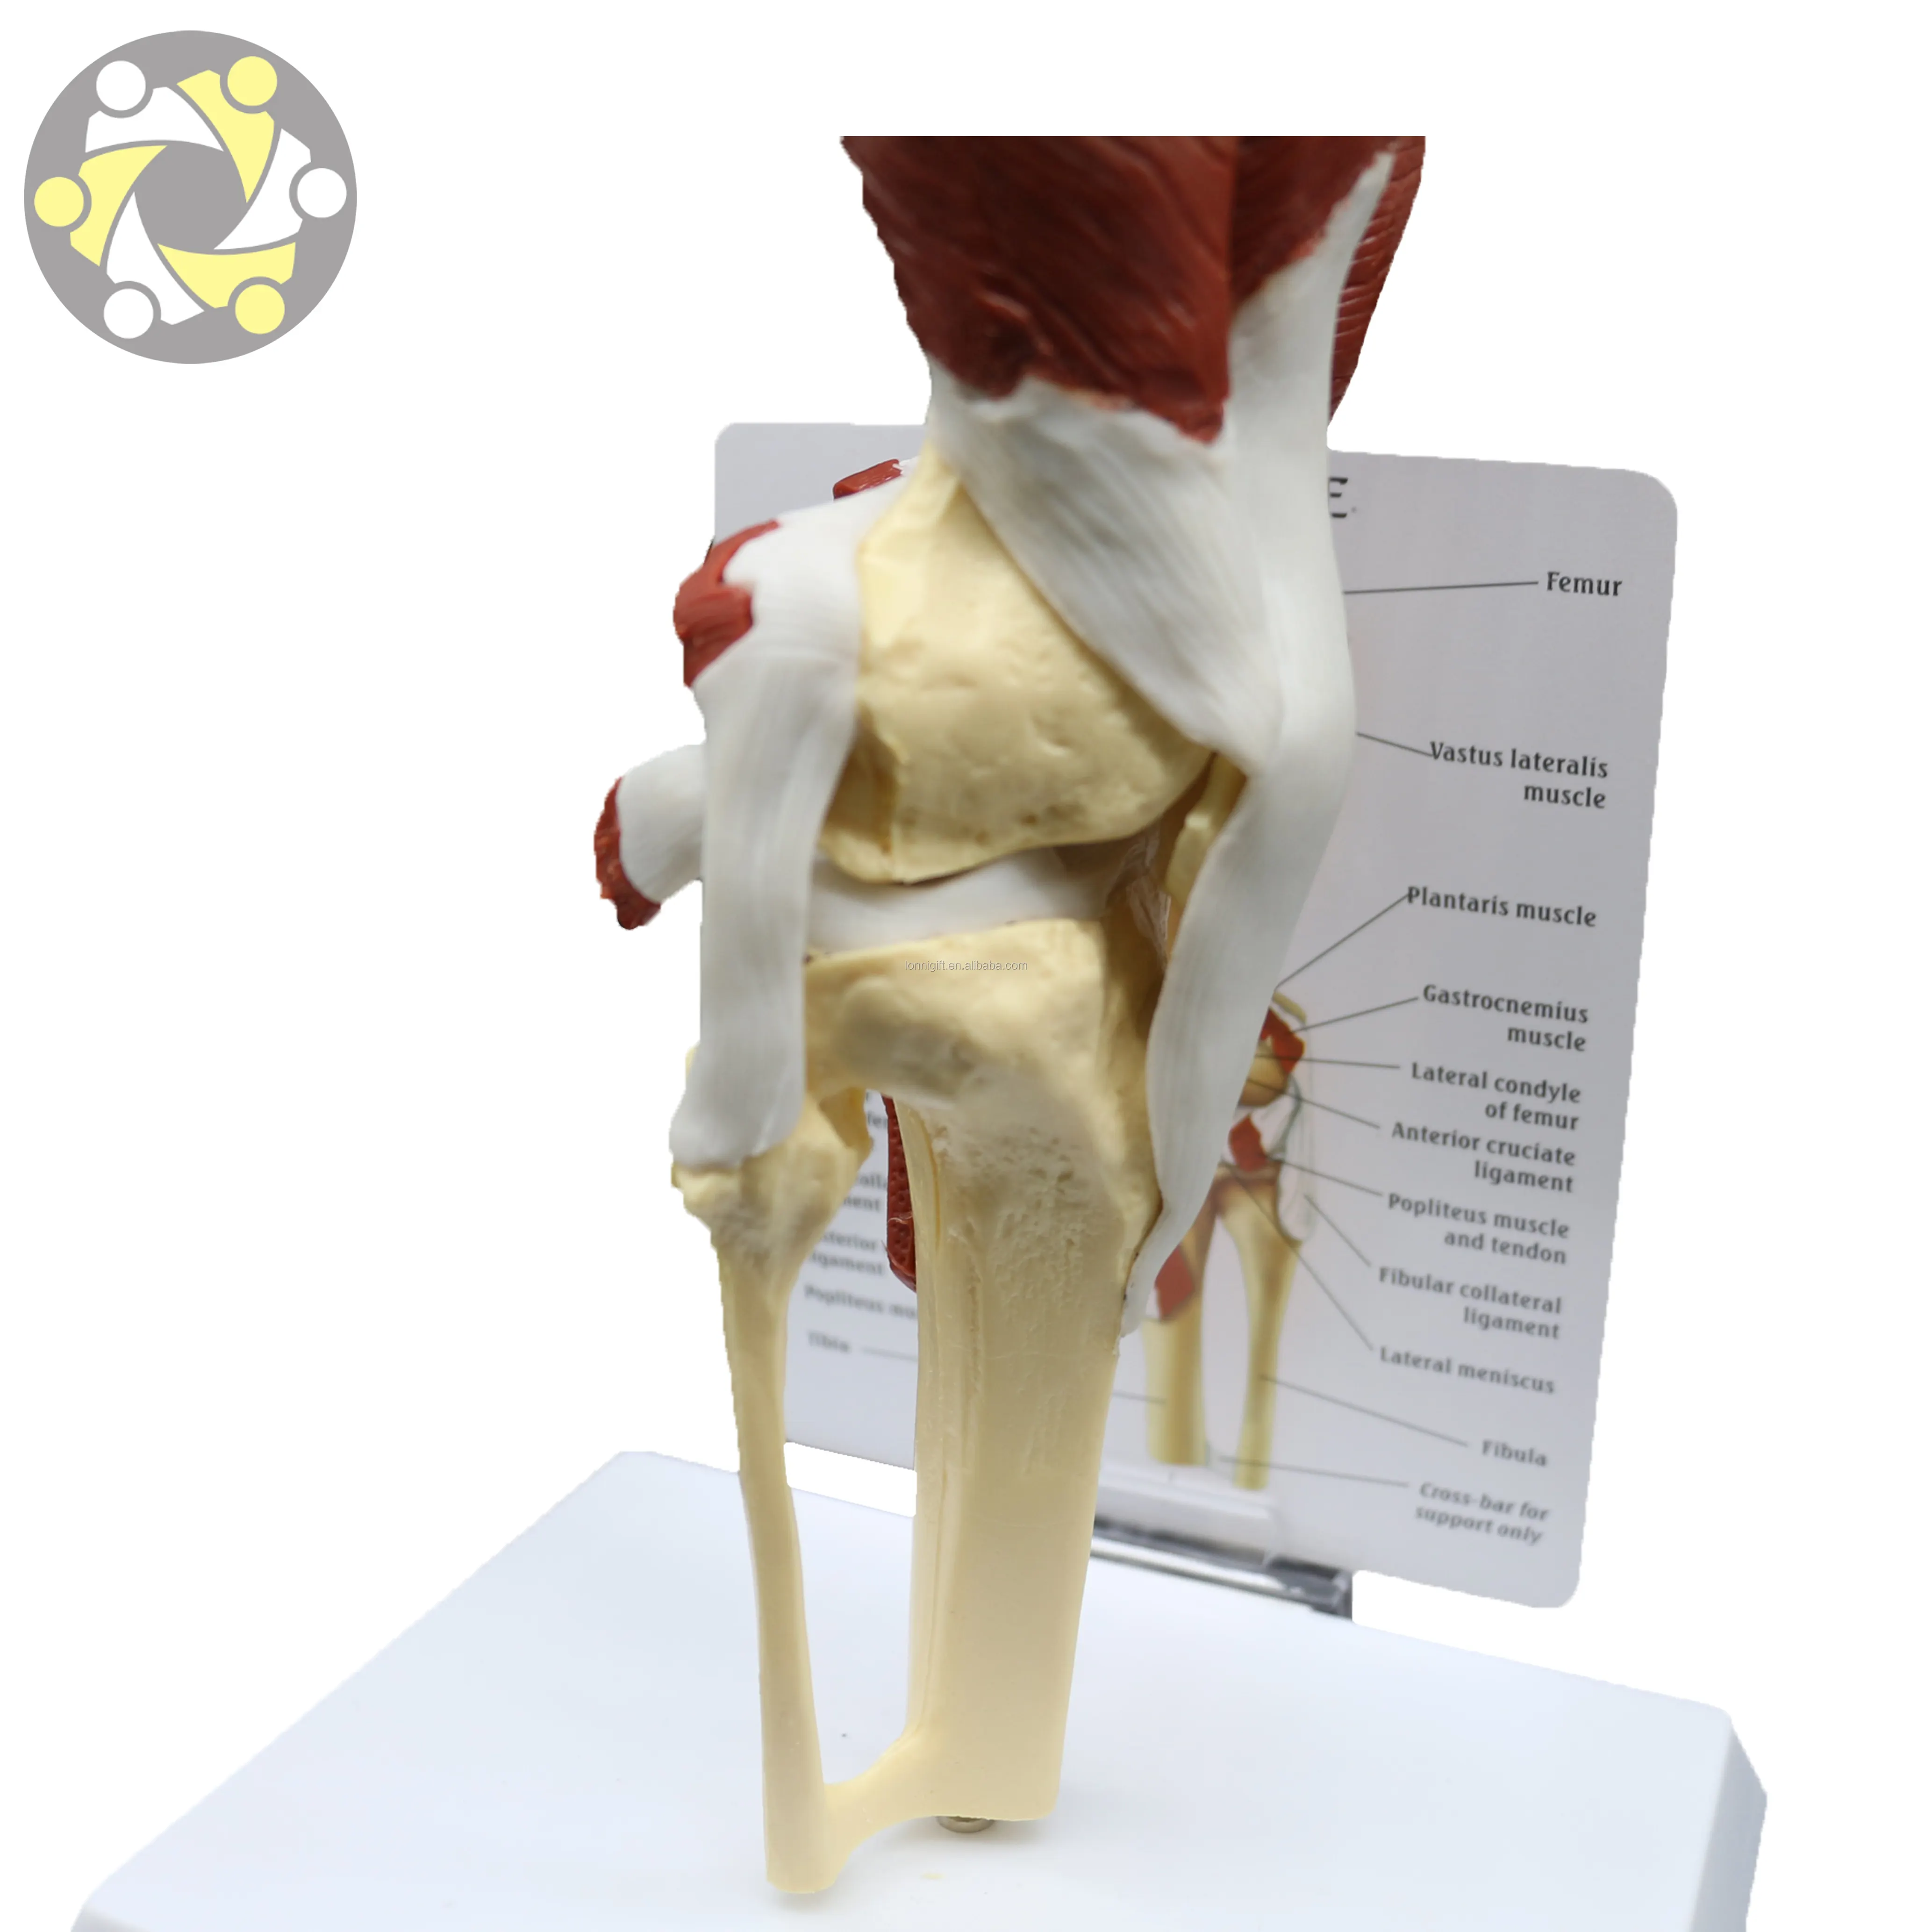 Human medical education model, knee joint bone model with muscular model